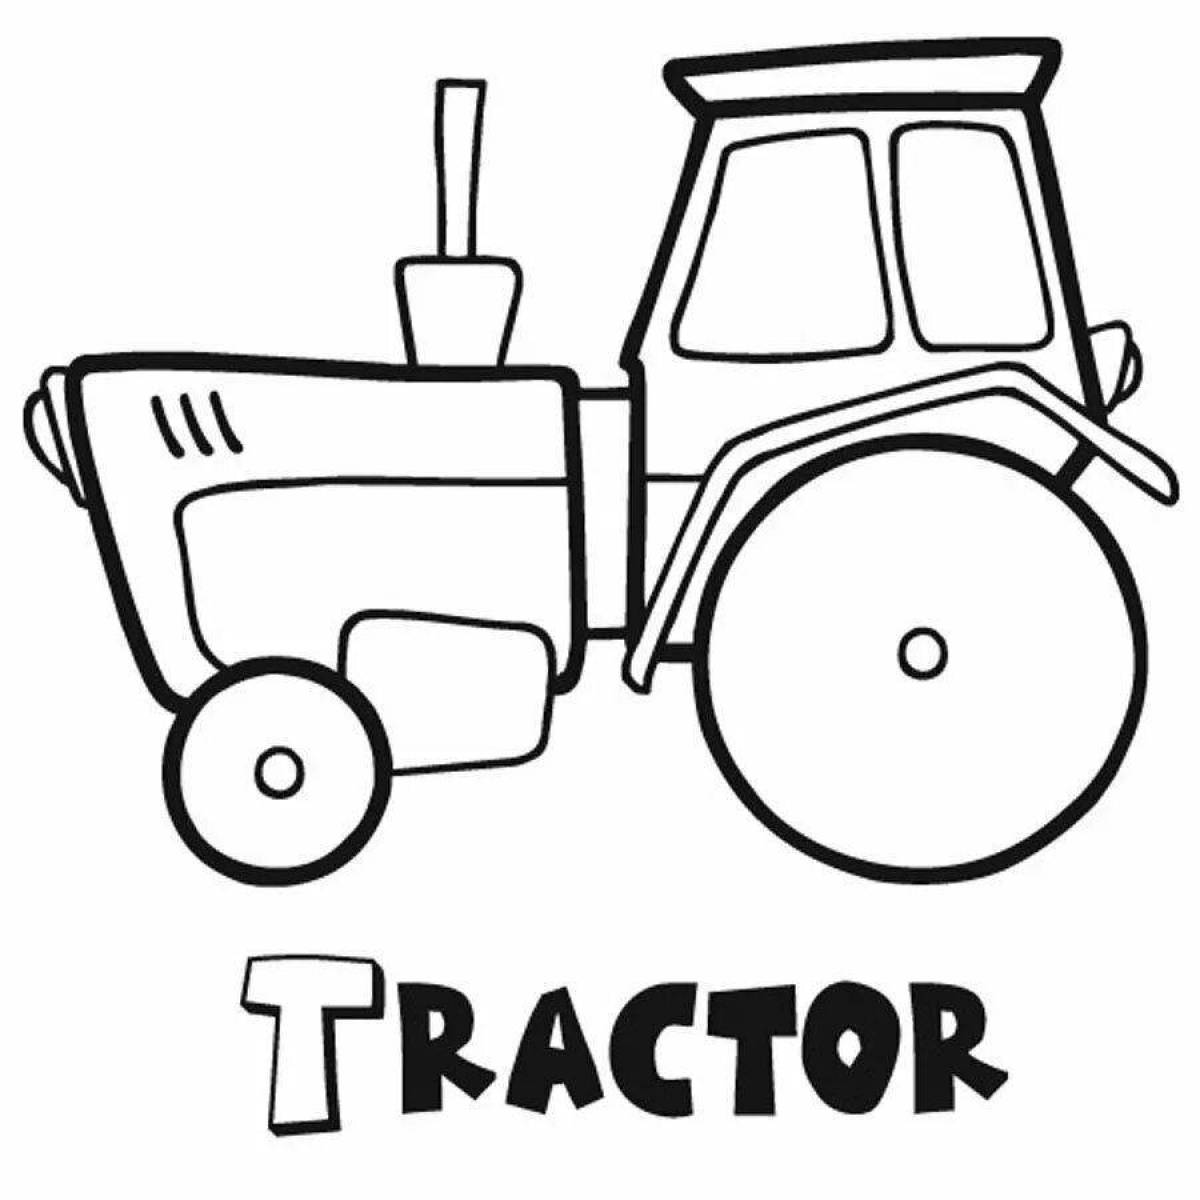 Humorous drawing of a tractor for children